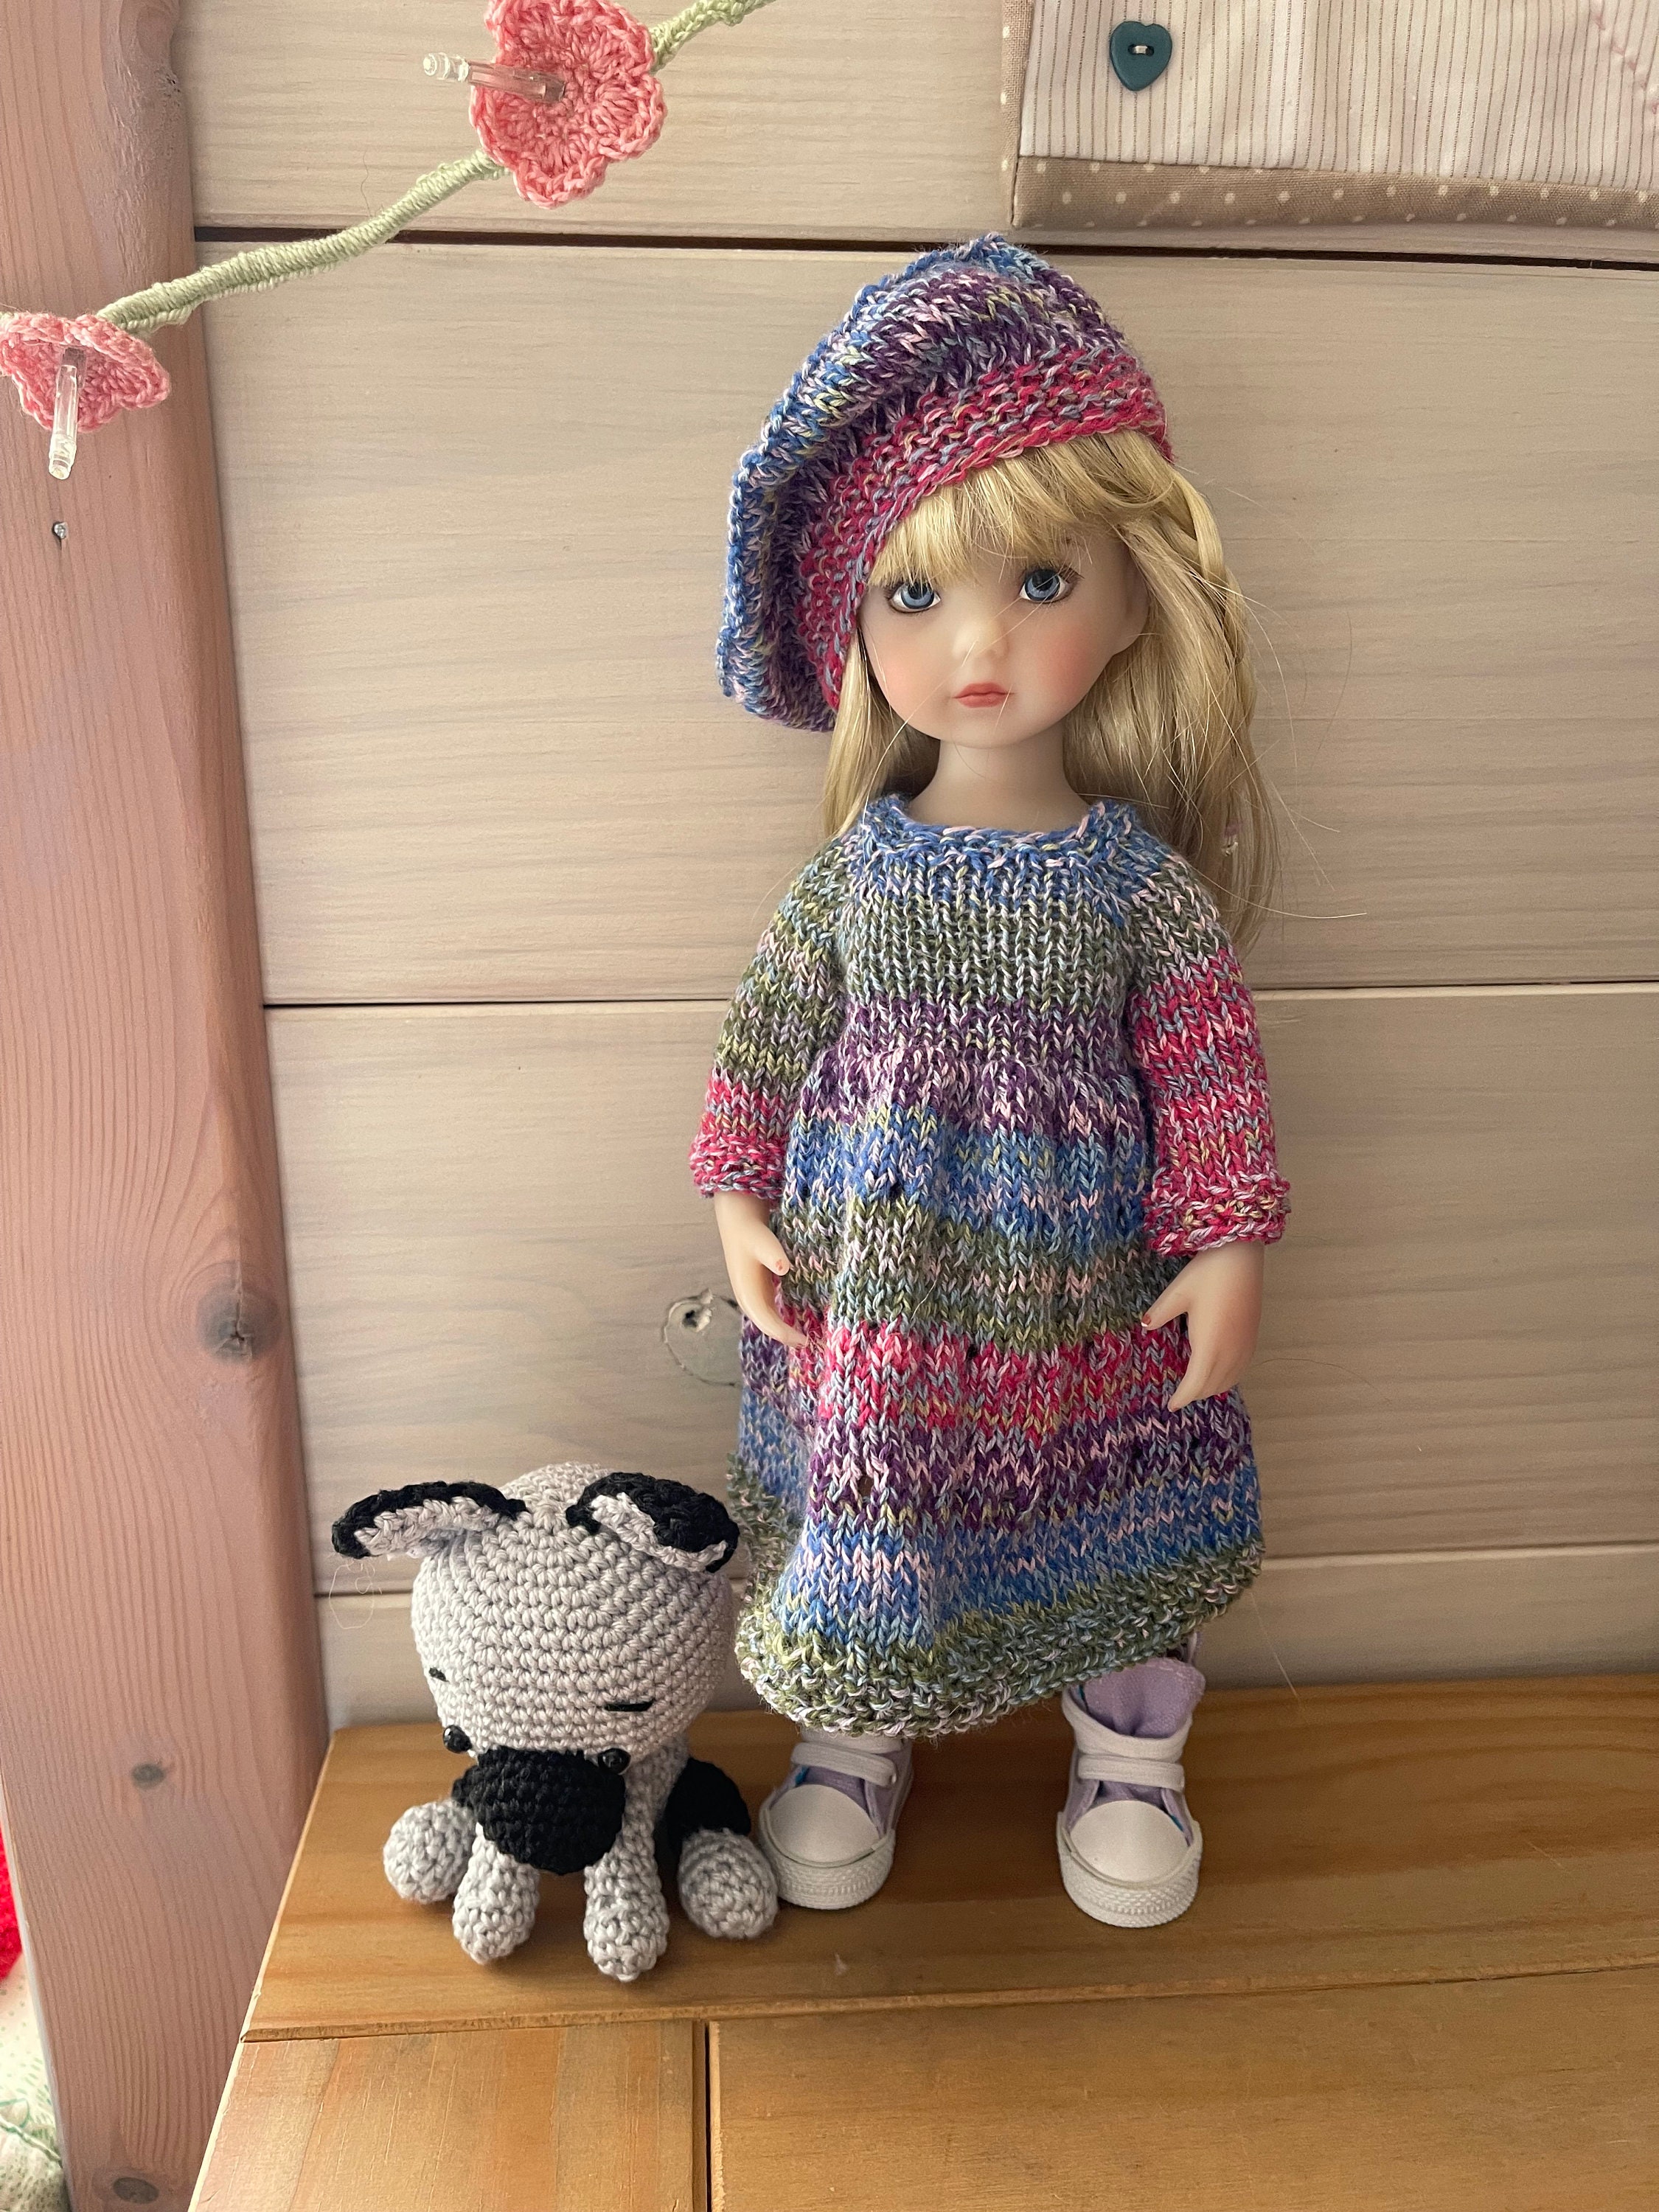  28 PCS Handmade Doll Clothes and Accessories for